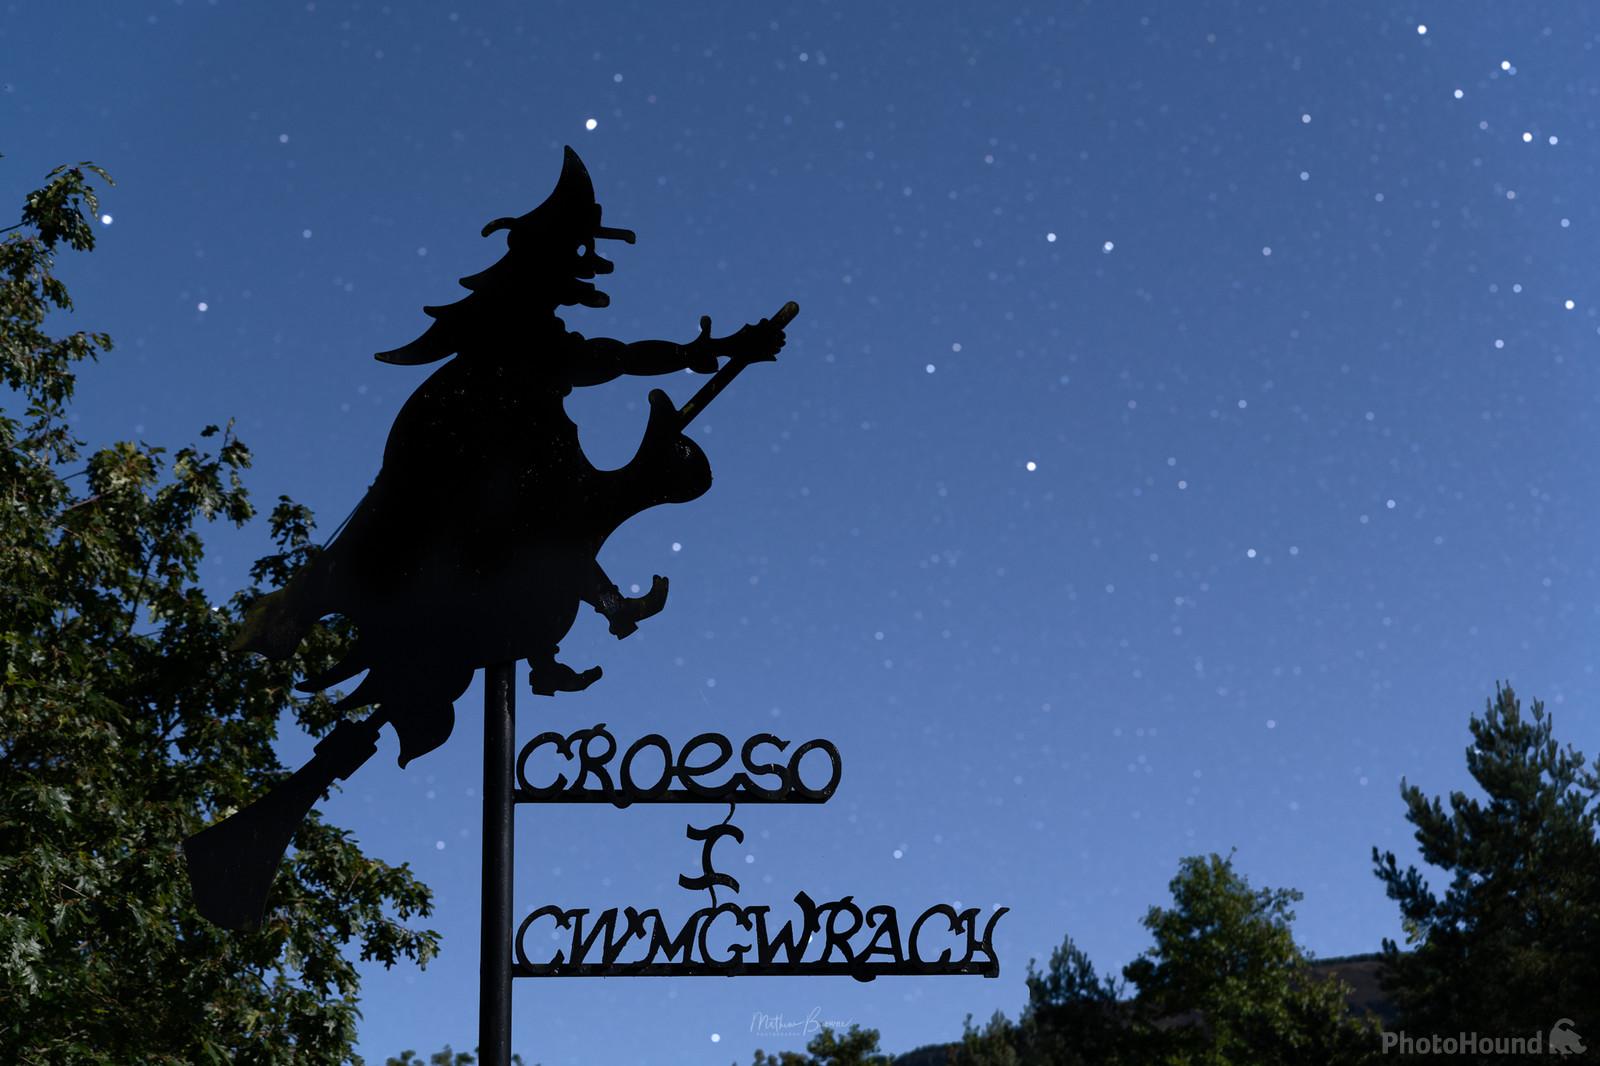 Image of Witch of Cwmgwrach by Mathew Browne